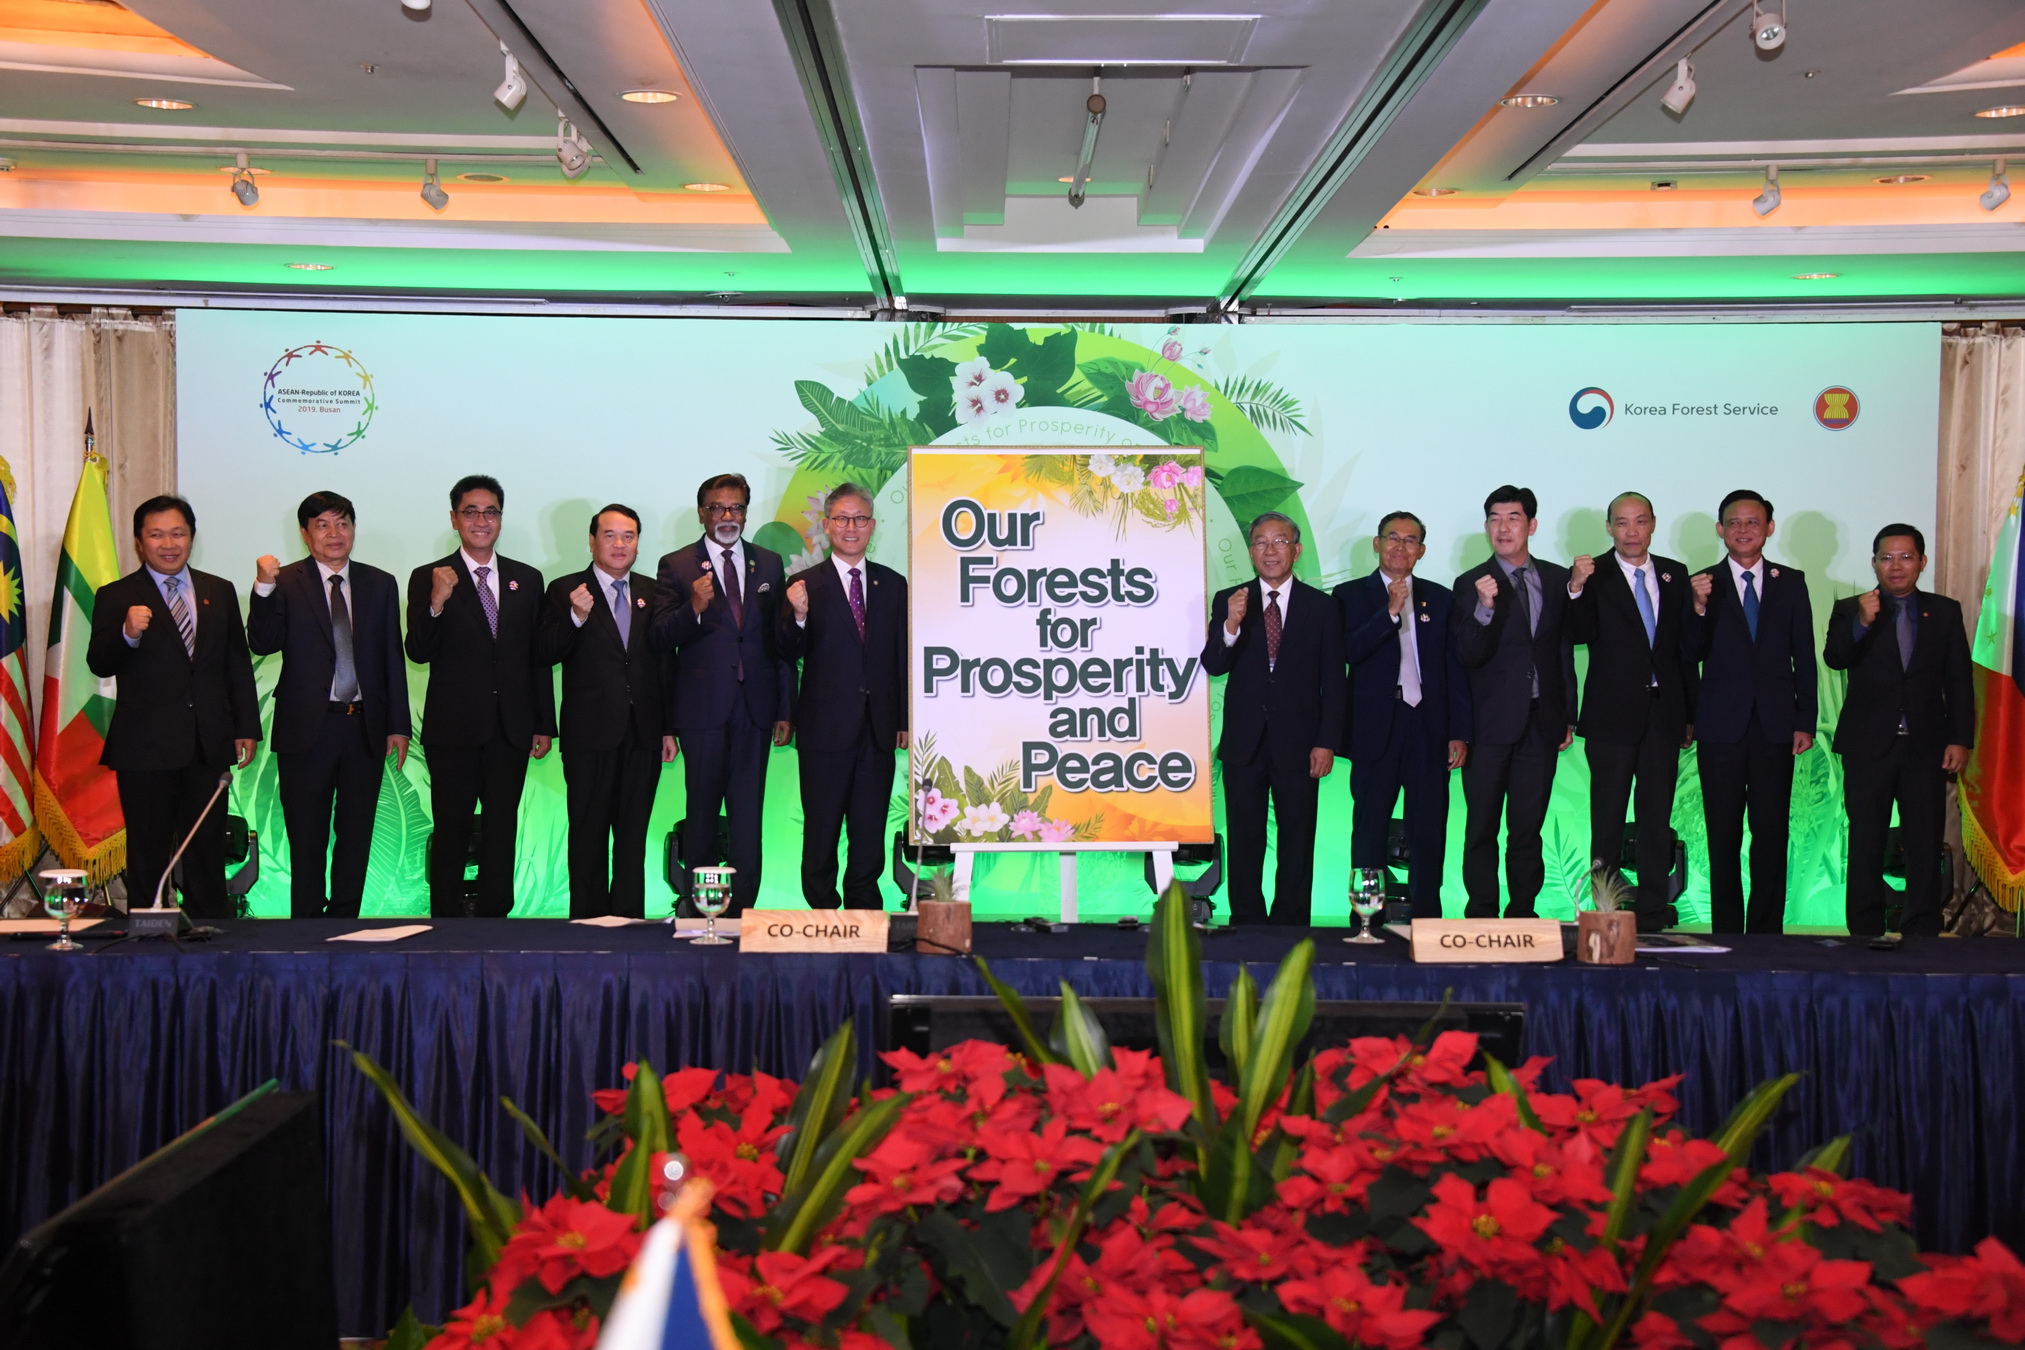 ASEAN-ROK High Level Meeting on Forestry 2019 